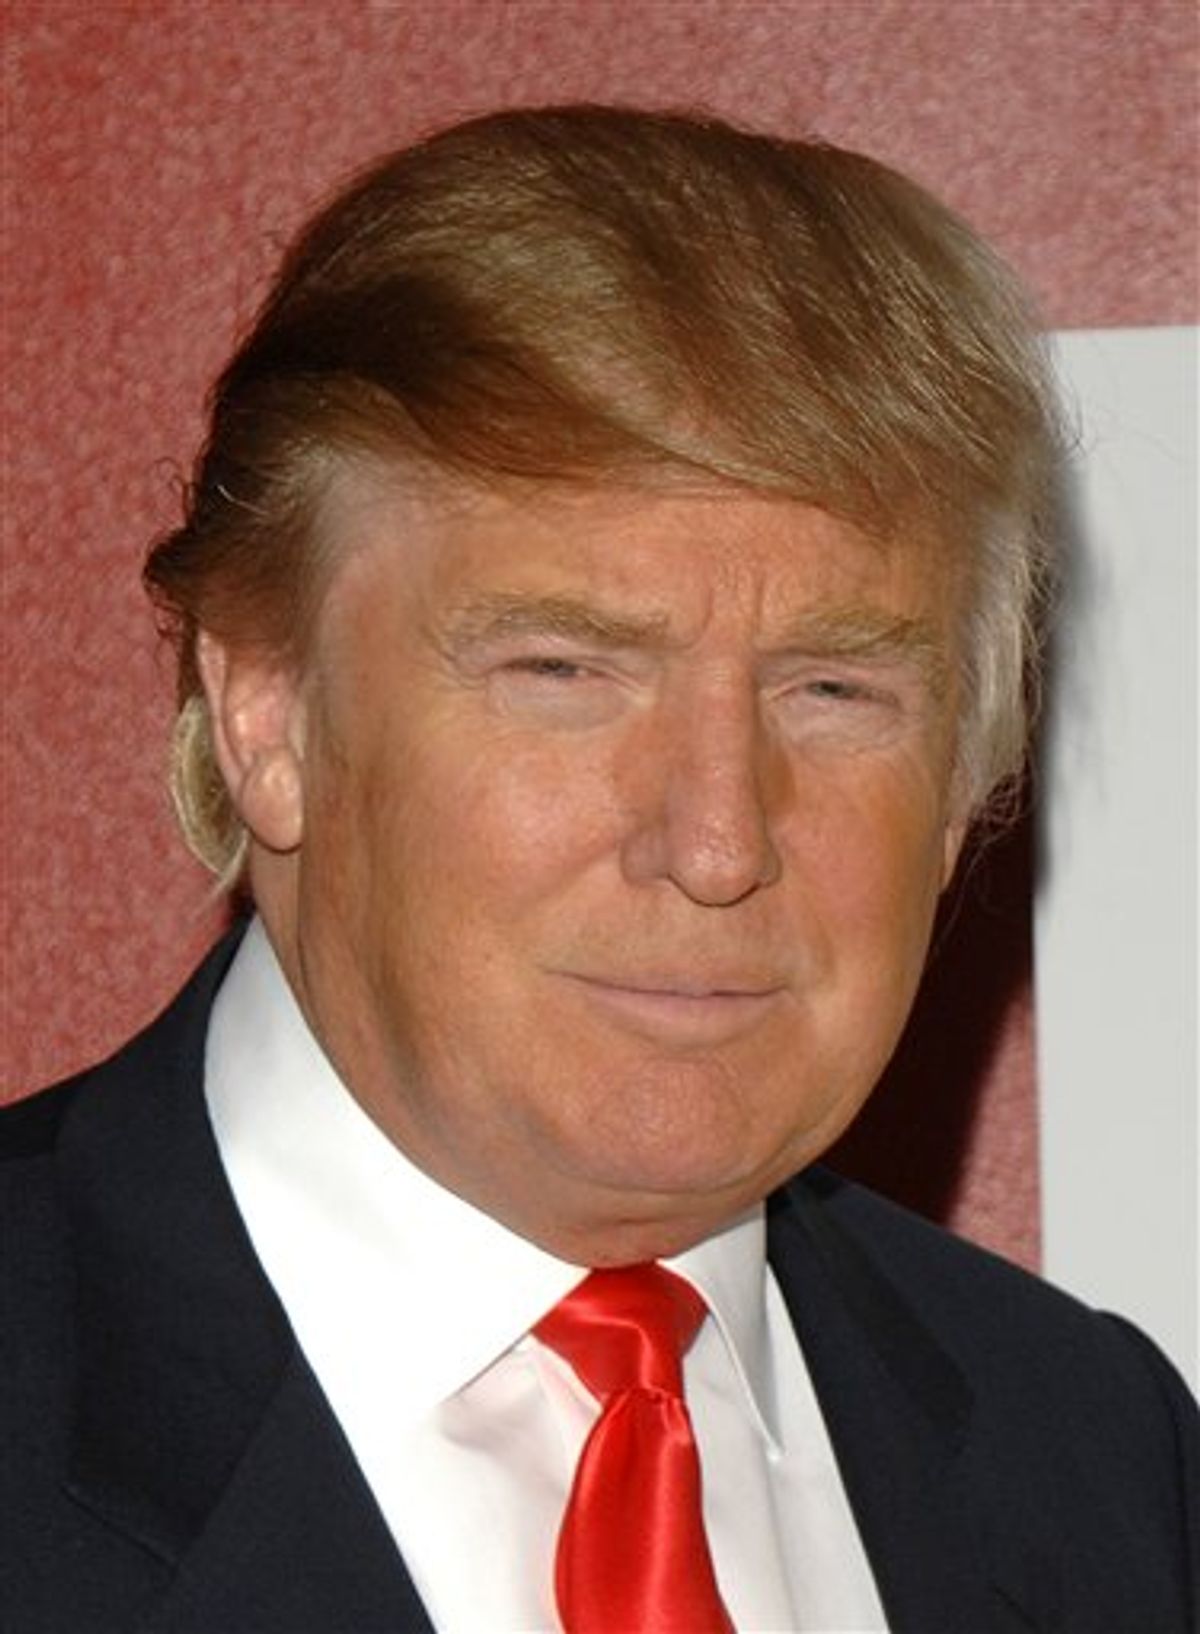 FILE - In this Aug. 19, 2009 file photo, Donald Trump attends a screening at The Museum of Modern Art in New York. Trump is offering to buy out one of the major investors in the real estate partnership that controls the site near ground zero where a Muslim group wants to build a 13-story Islamic center and mosque, according to a letter released by Trump's publicist Thursday, Sept. 9, 2010. (AP Photo/Peter Kramer, File) (AP)